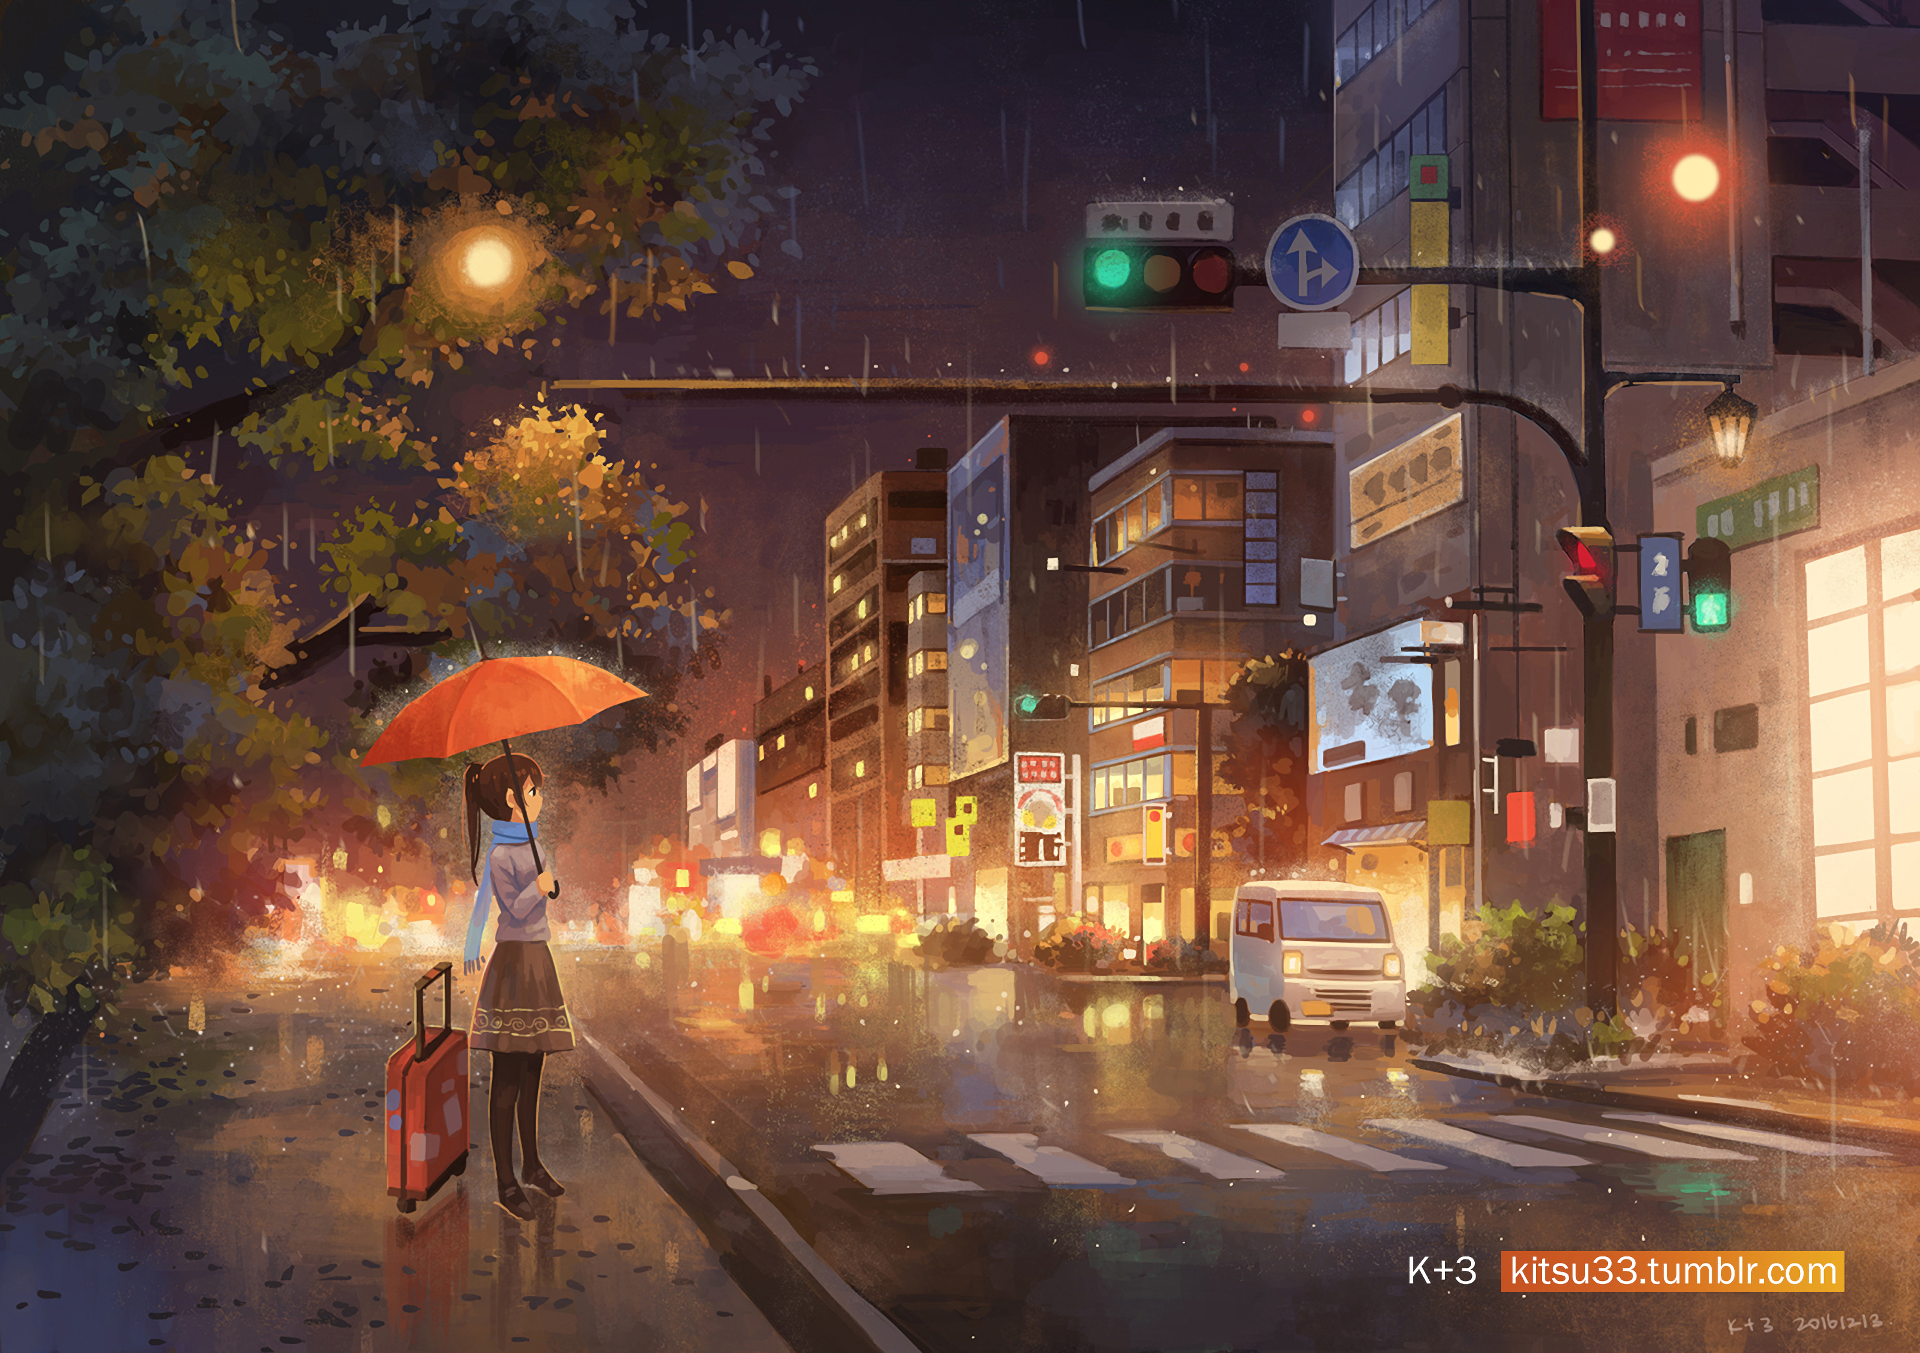 Beautiful Aesthetic Anime City Wallpaper [1200 * 630] resized by Ze Robot